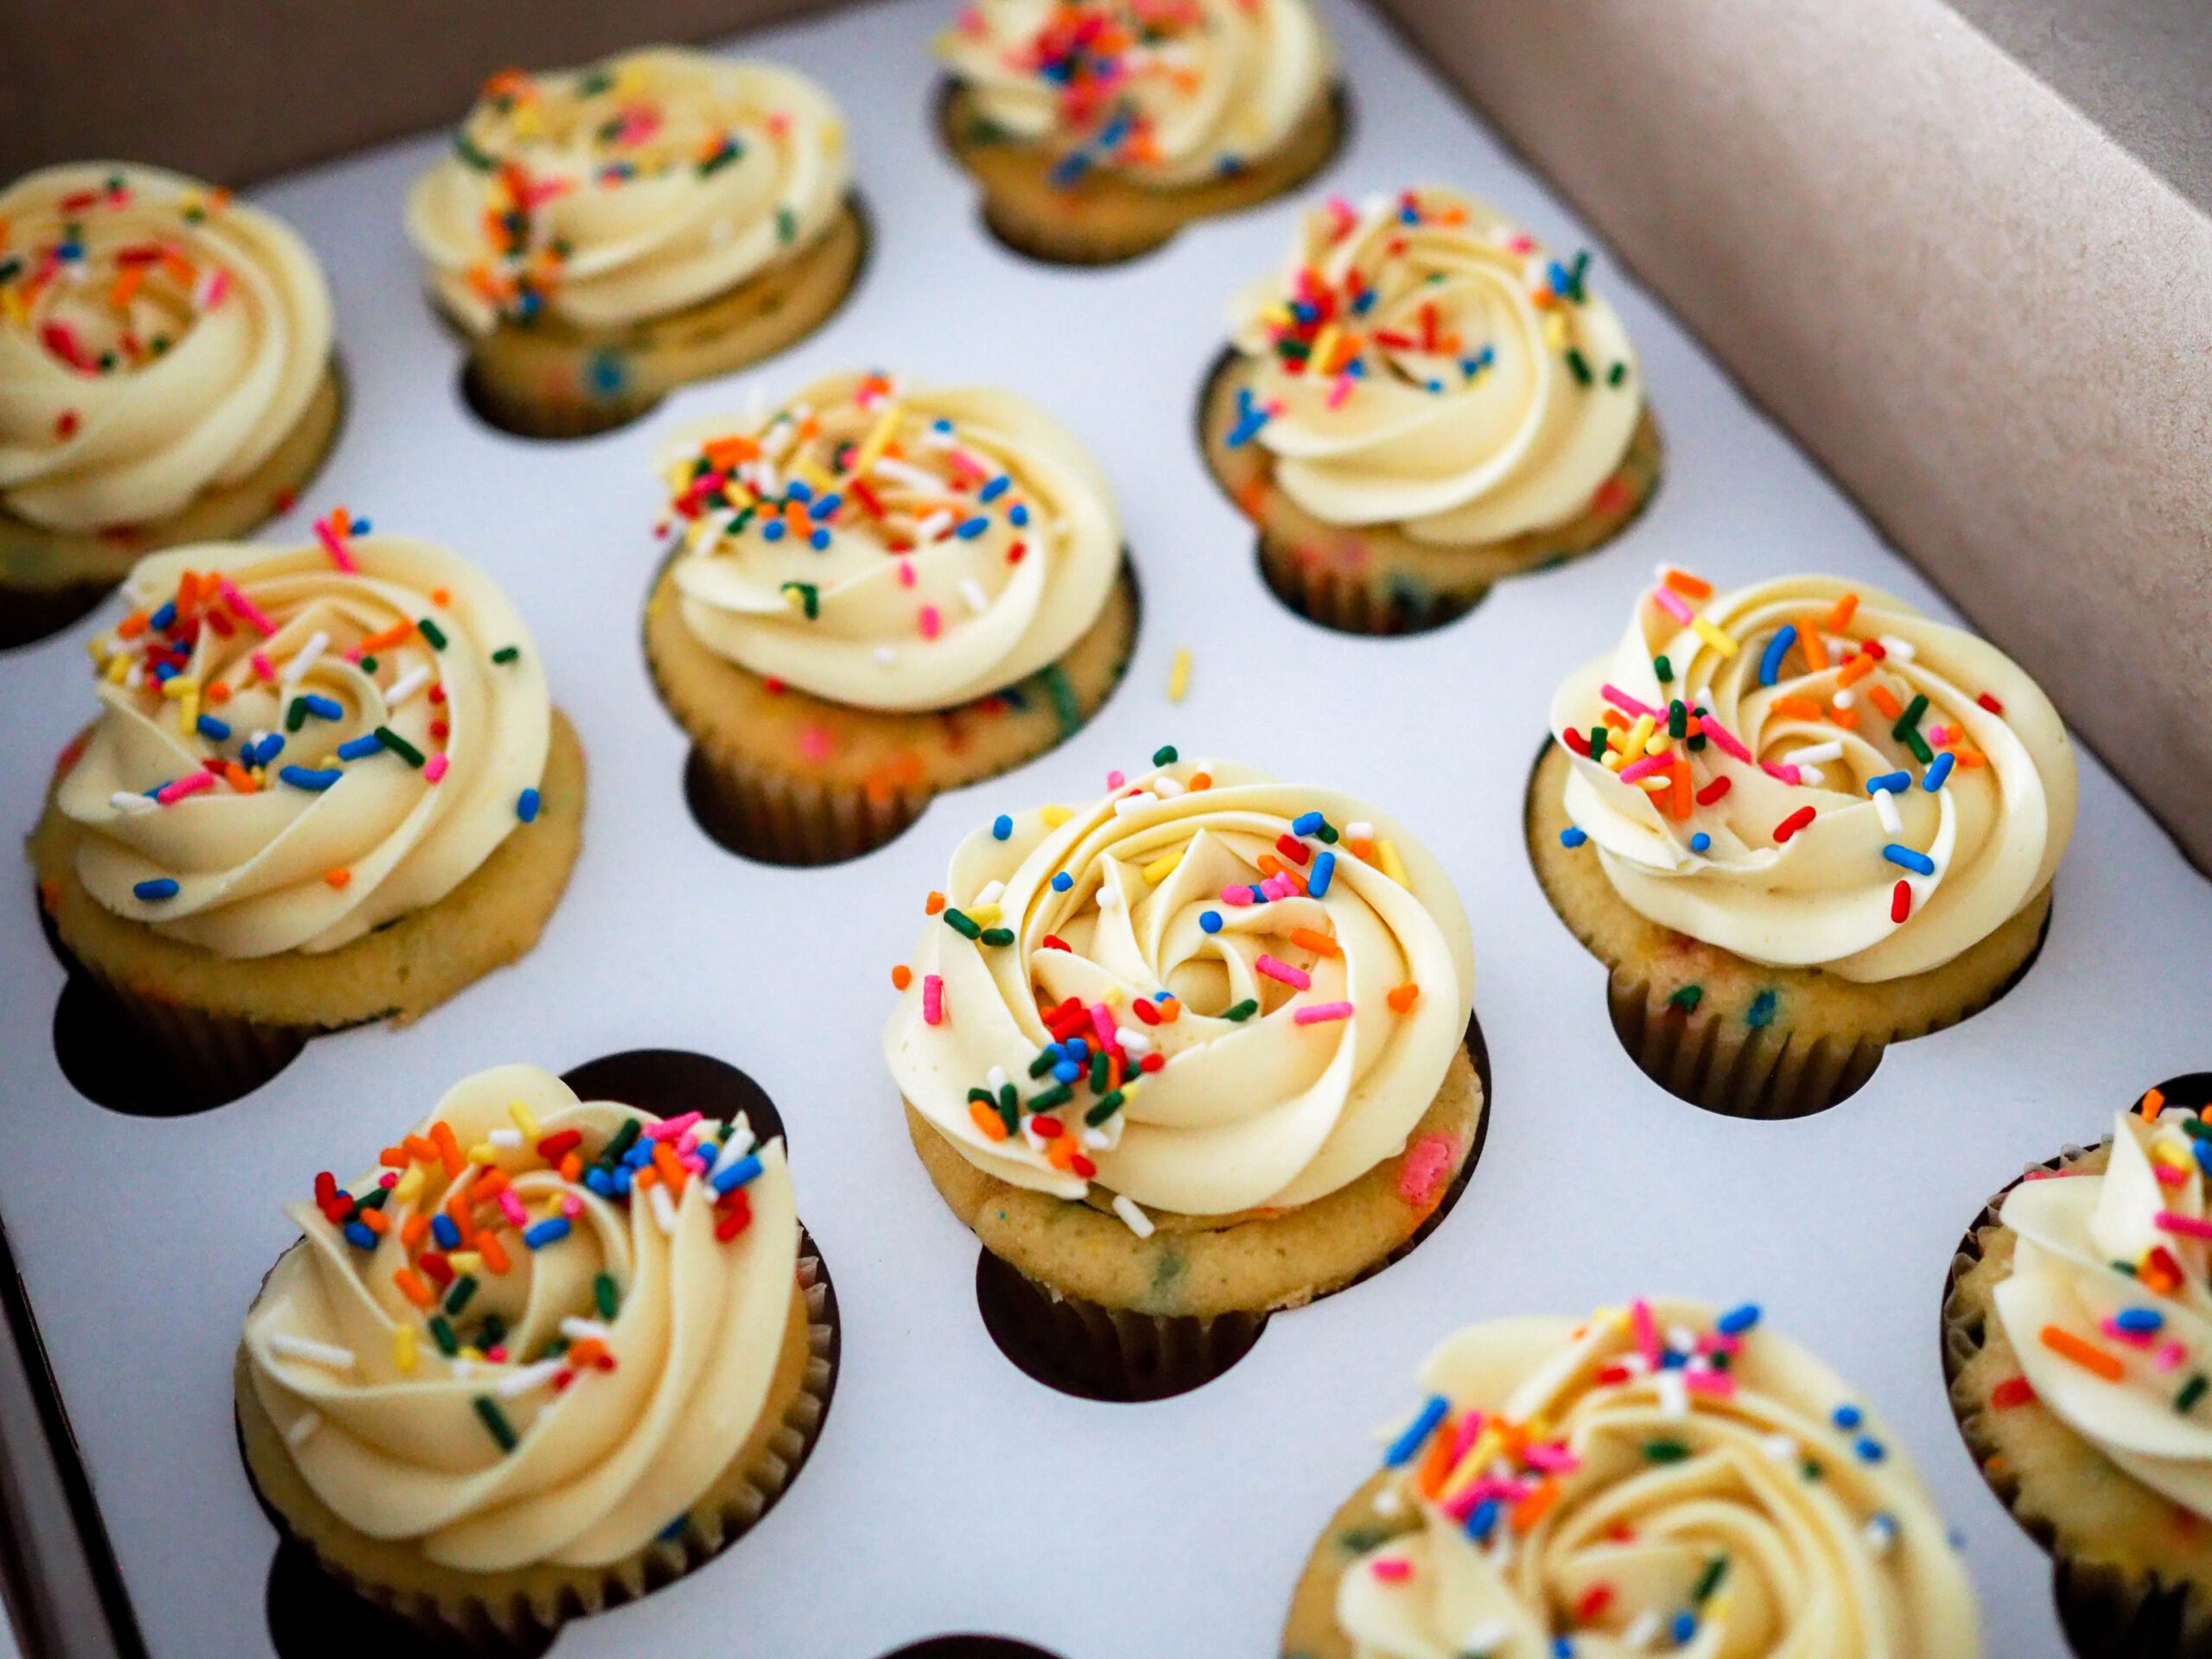 Funfetti cupcakes in a box, decorated with lots of rainbow sprinkles.